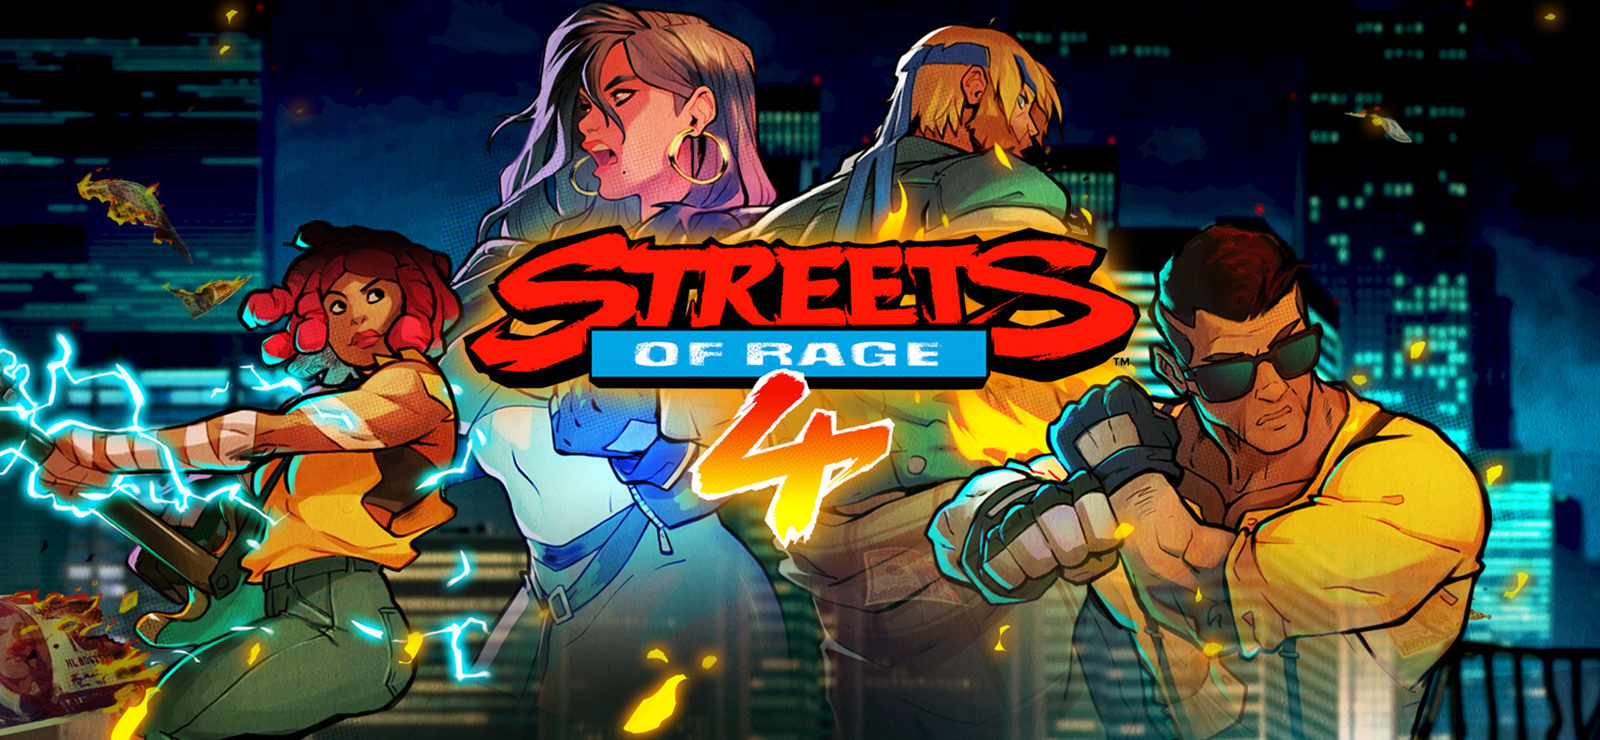 Streets of Rage 4 - 4 Player Co-op on XBOX ONE X (Gameplay) 